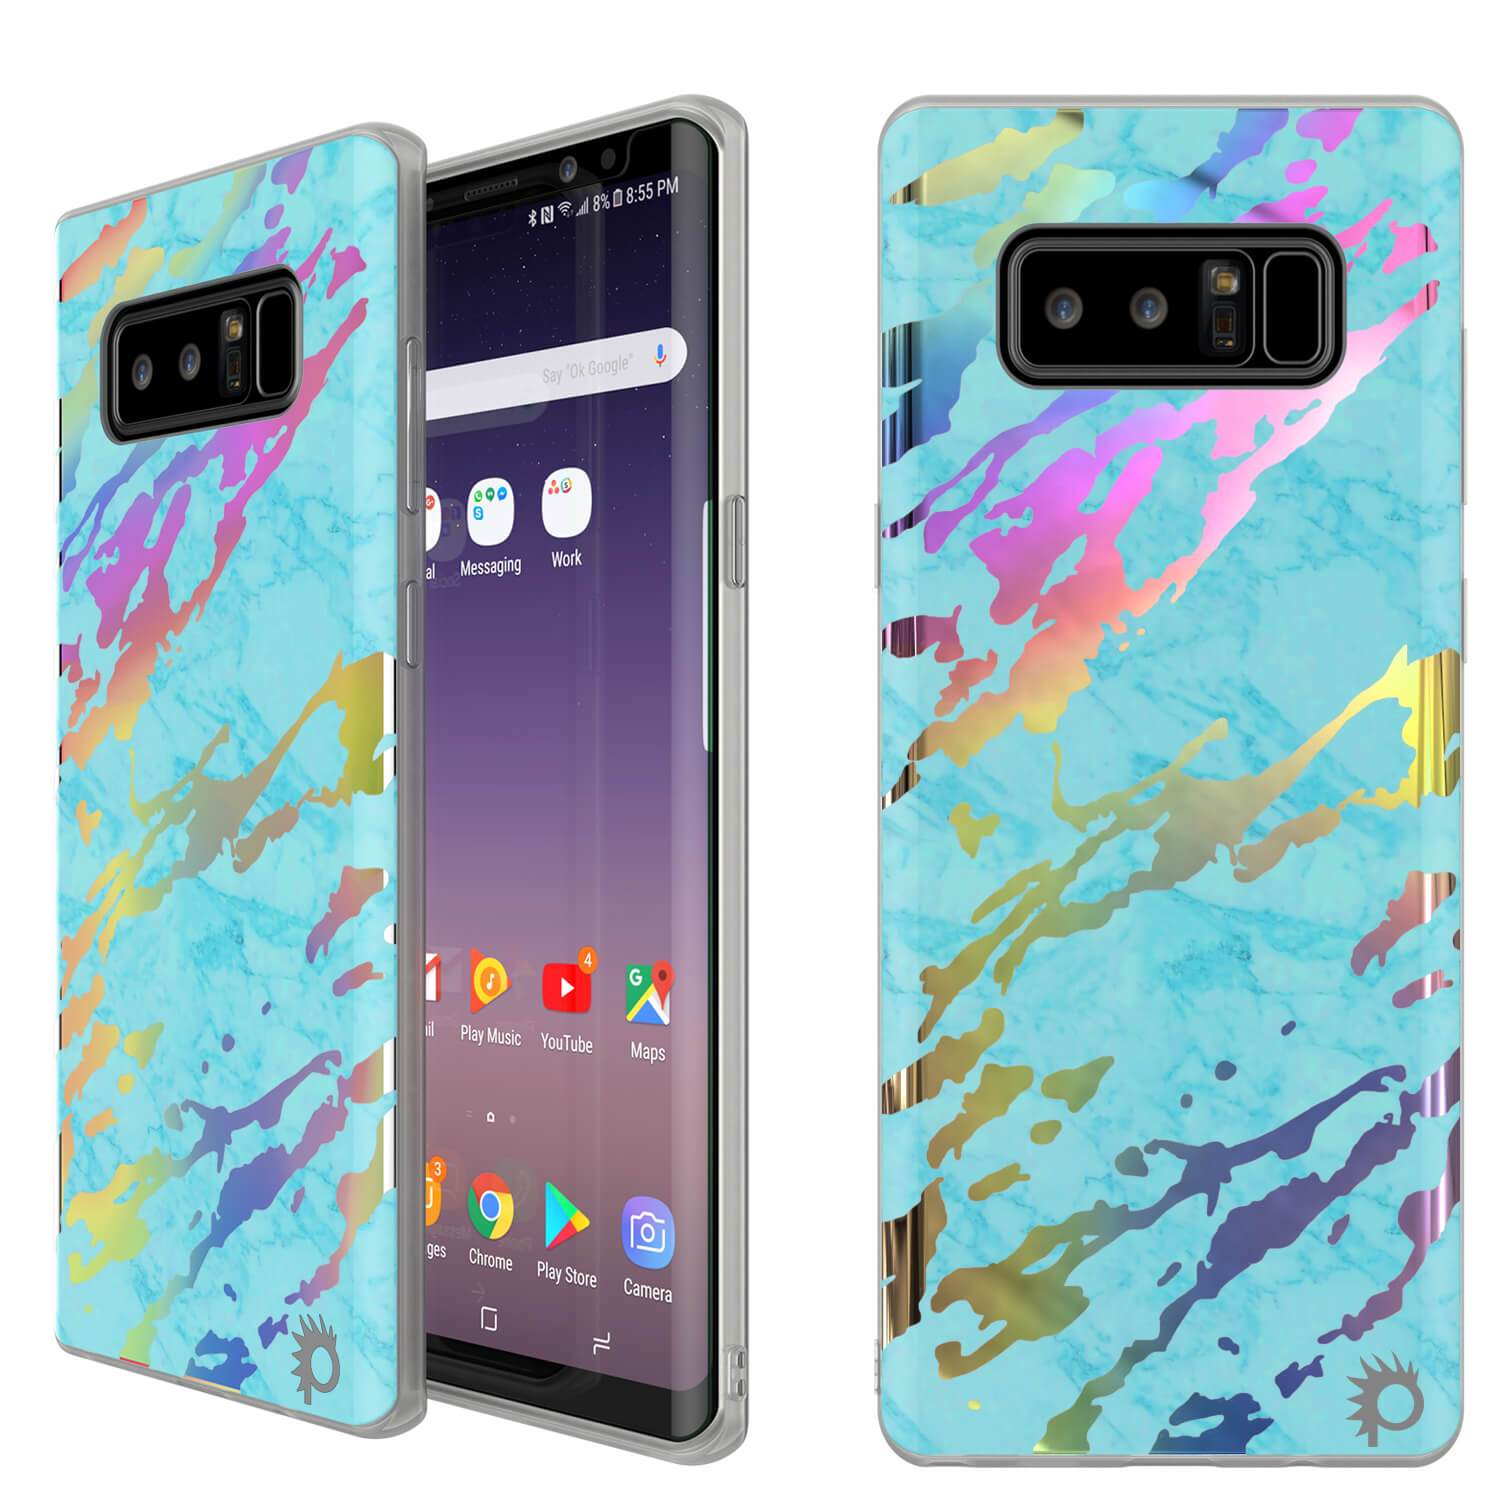 Galaxy Note 8 Marble Case, Protective Full Body Cover [Teal Onyx]